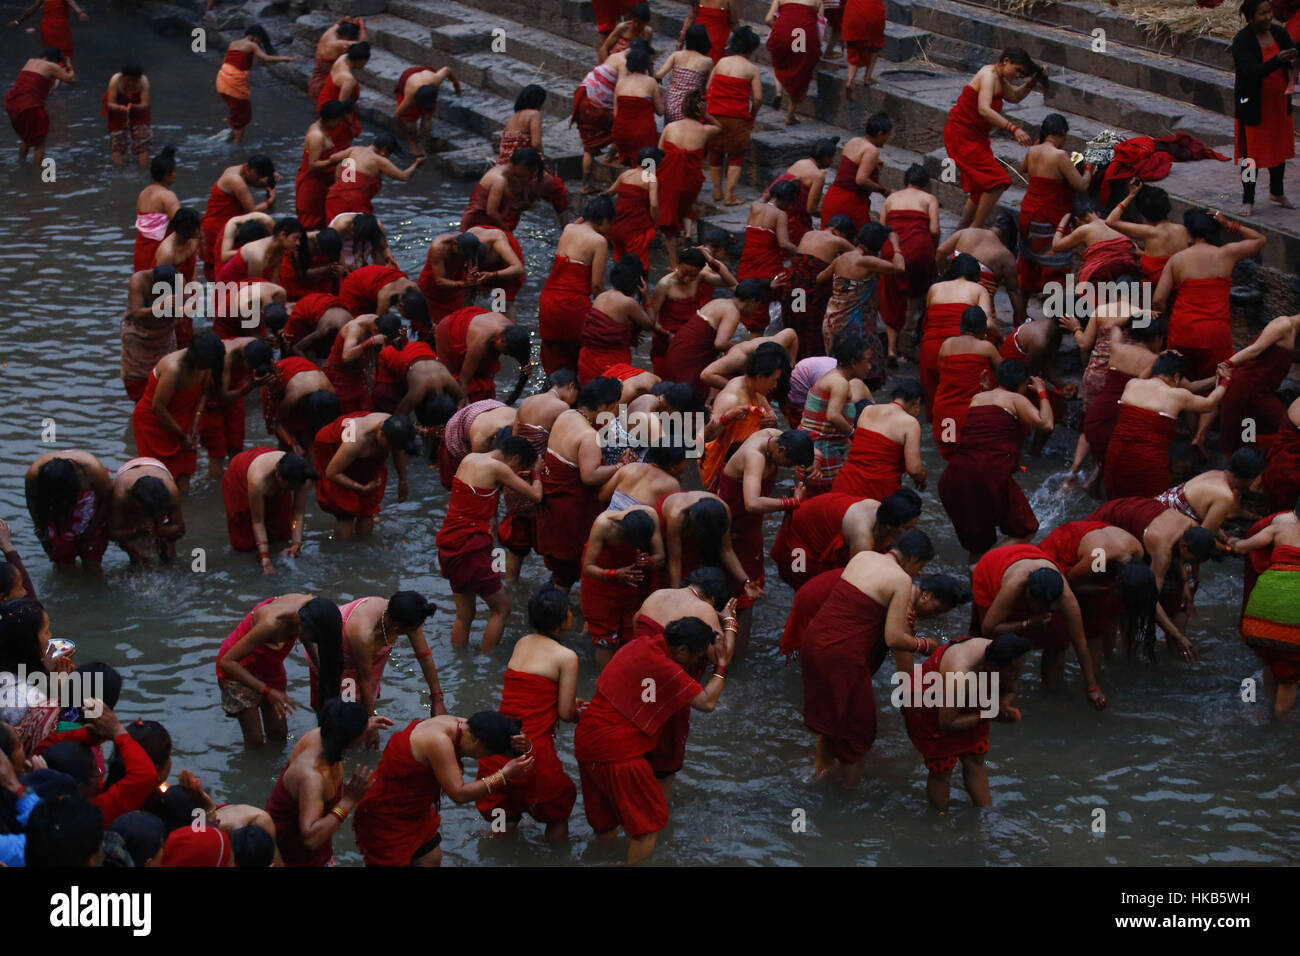 Kathmandu, Nepal. 27th Jan, 2017. Nepalese Hindu devotees return after taking a holy dip at Bagmati River during the month-long Swasthani Bratakatha festival at Pashupathinath Temple in Kathmandu, Nepal. Devotees recite Holy Scripture and women pray for the wellbeing of their spouses throughout the month-long fast. Credit: Skanda Gautam/ZUMA Wire/Alamy Live News Stock Photo